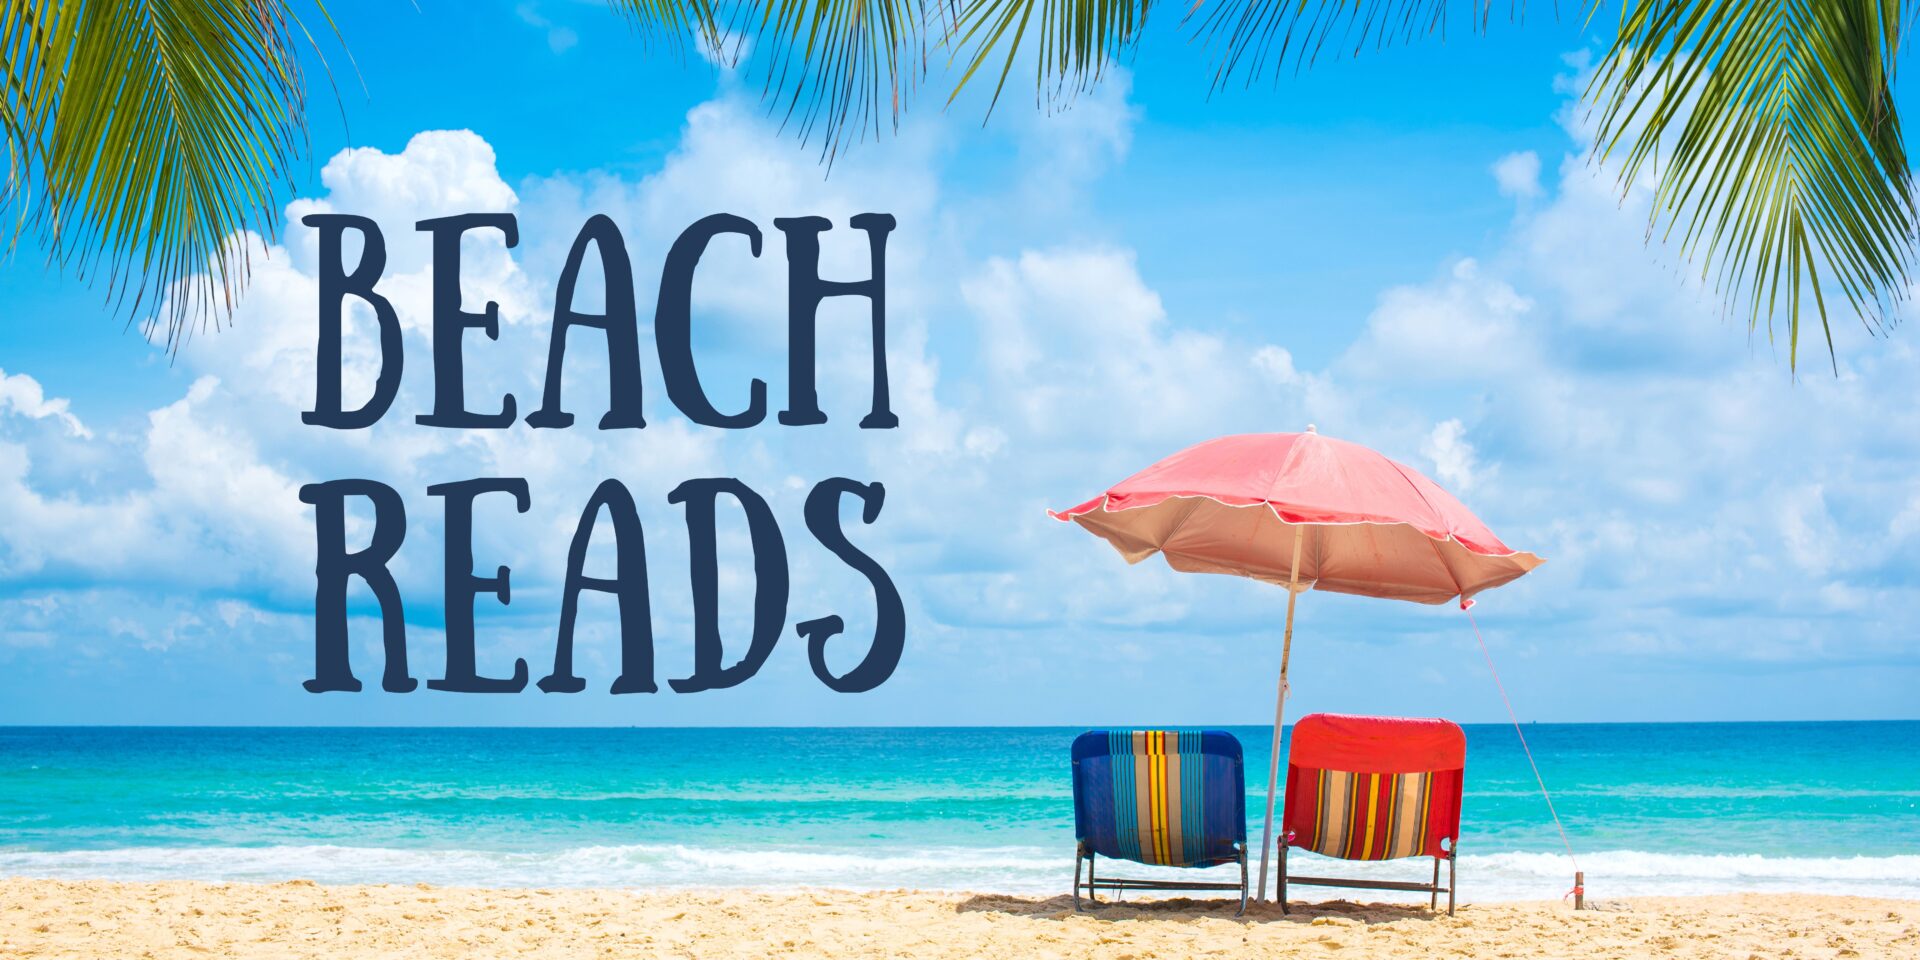 An image of a beach with two chairs covered by an umbrella facing the water, with text that says "Beach Reads"